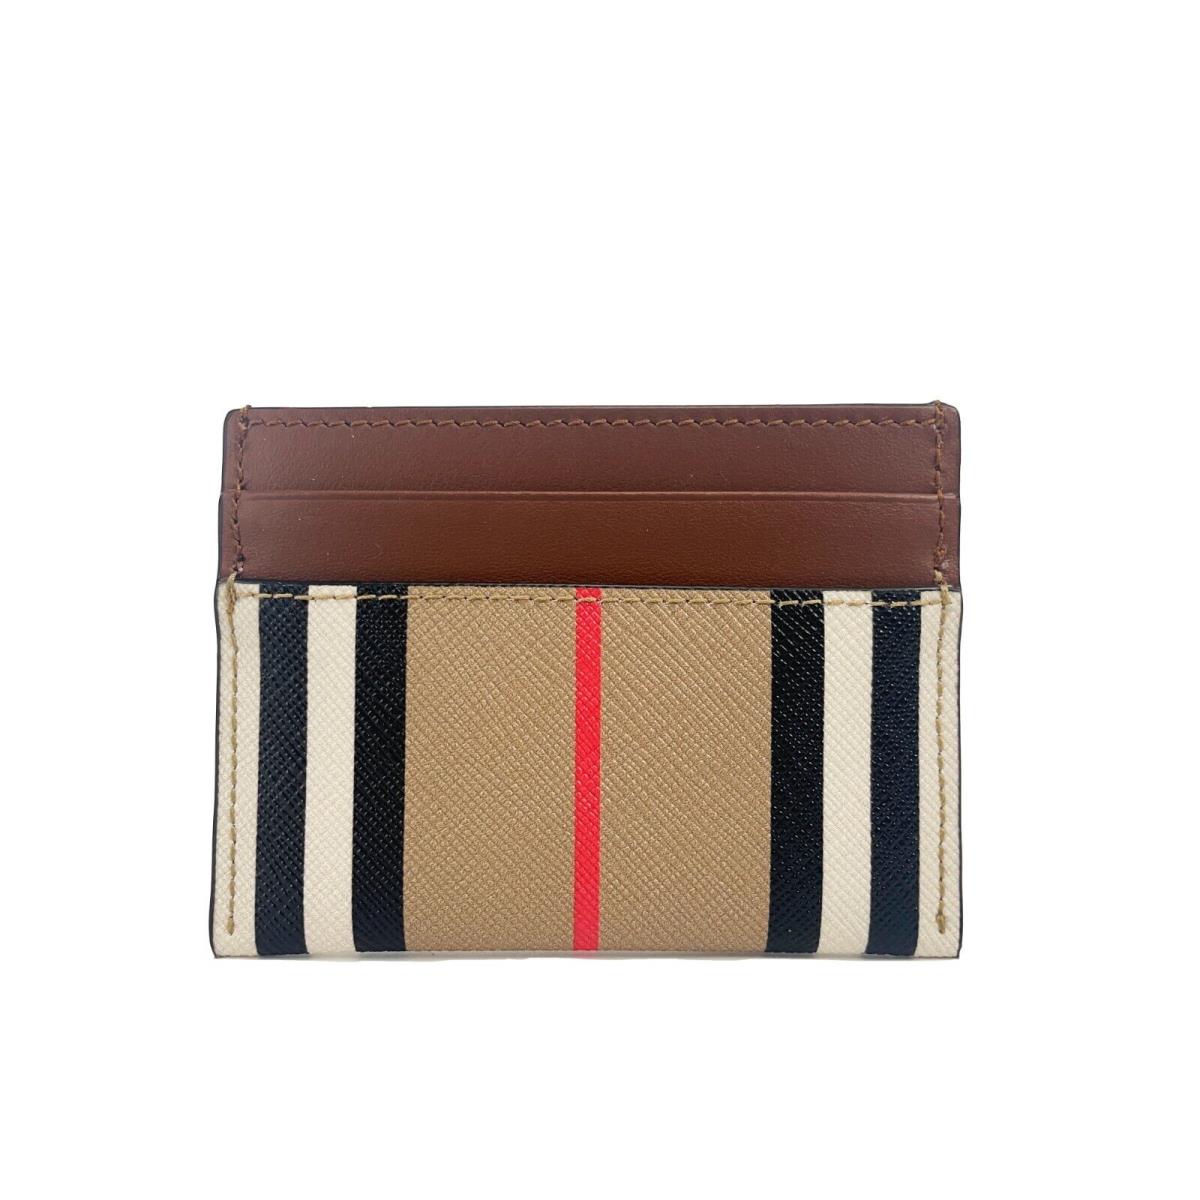 Burberry Sandon Tan Canvas Check Printed Leather Slim Card Case Wallet